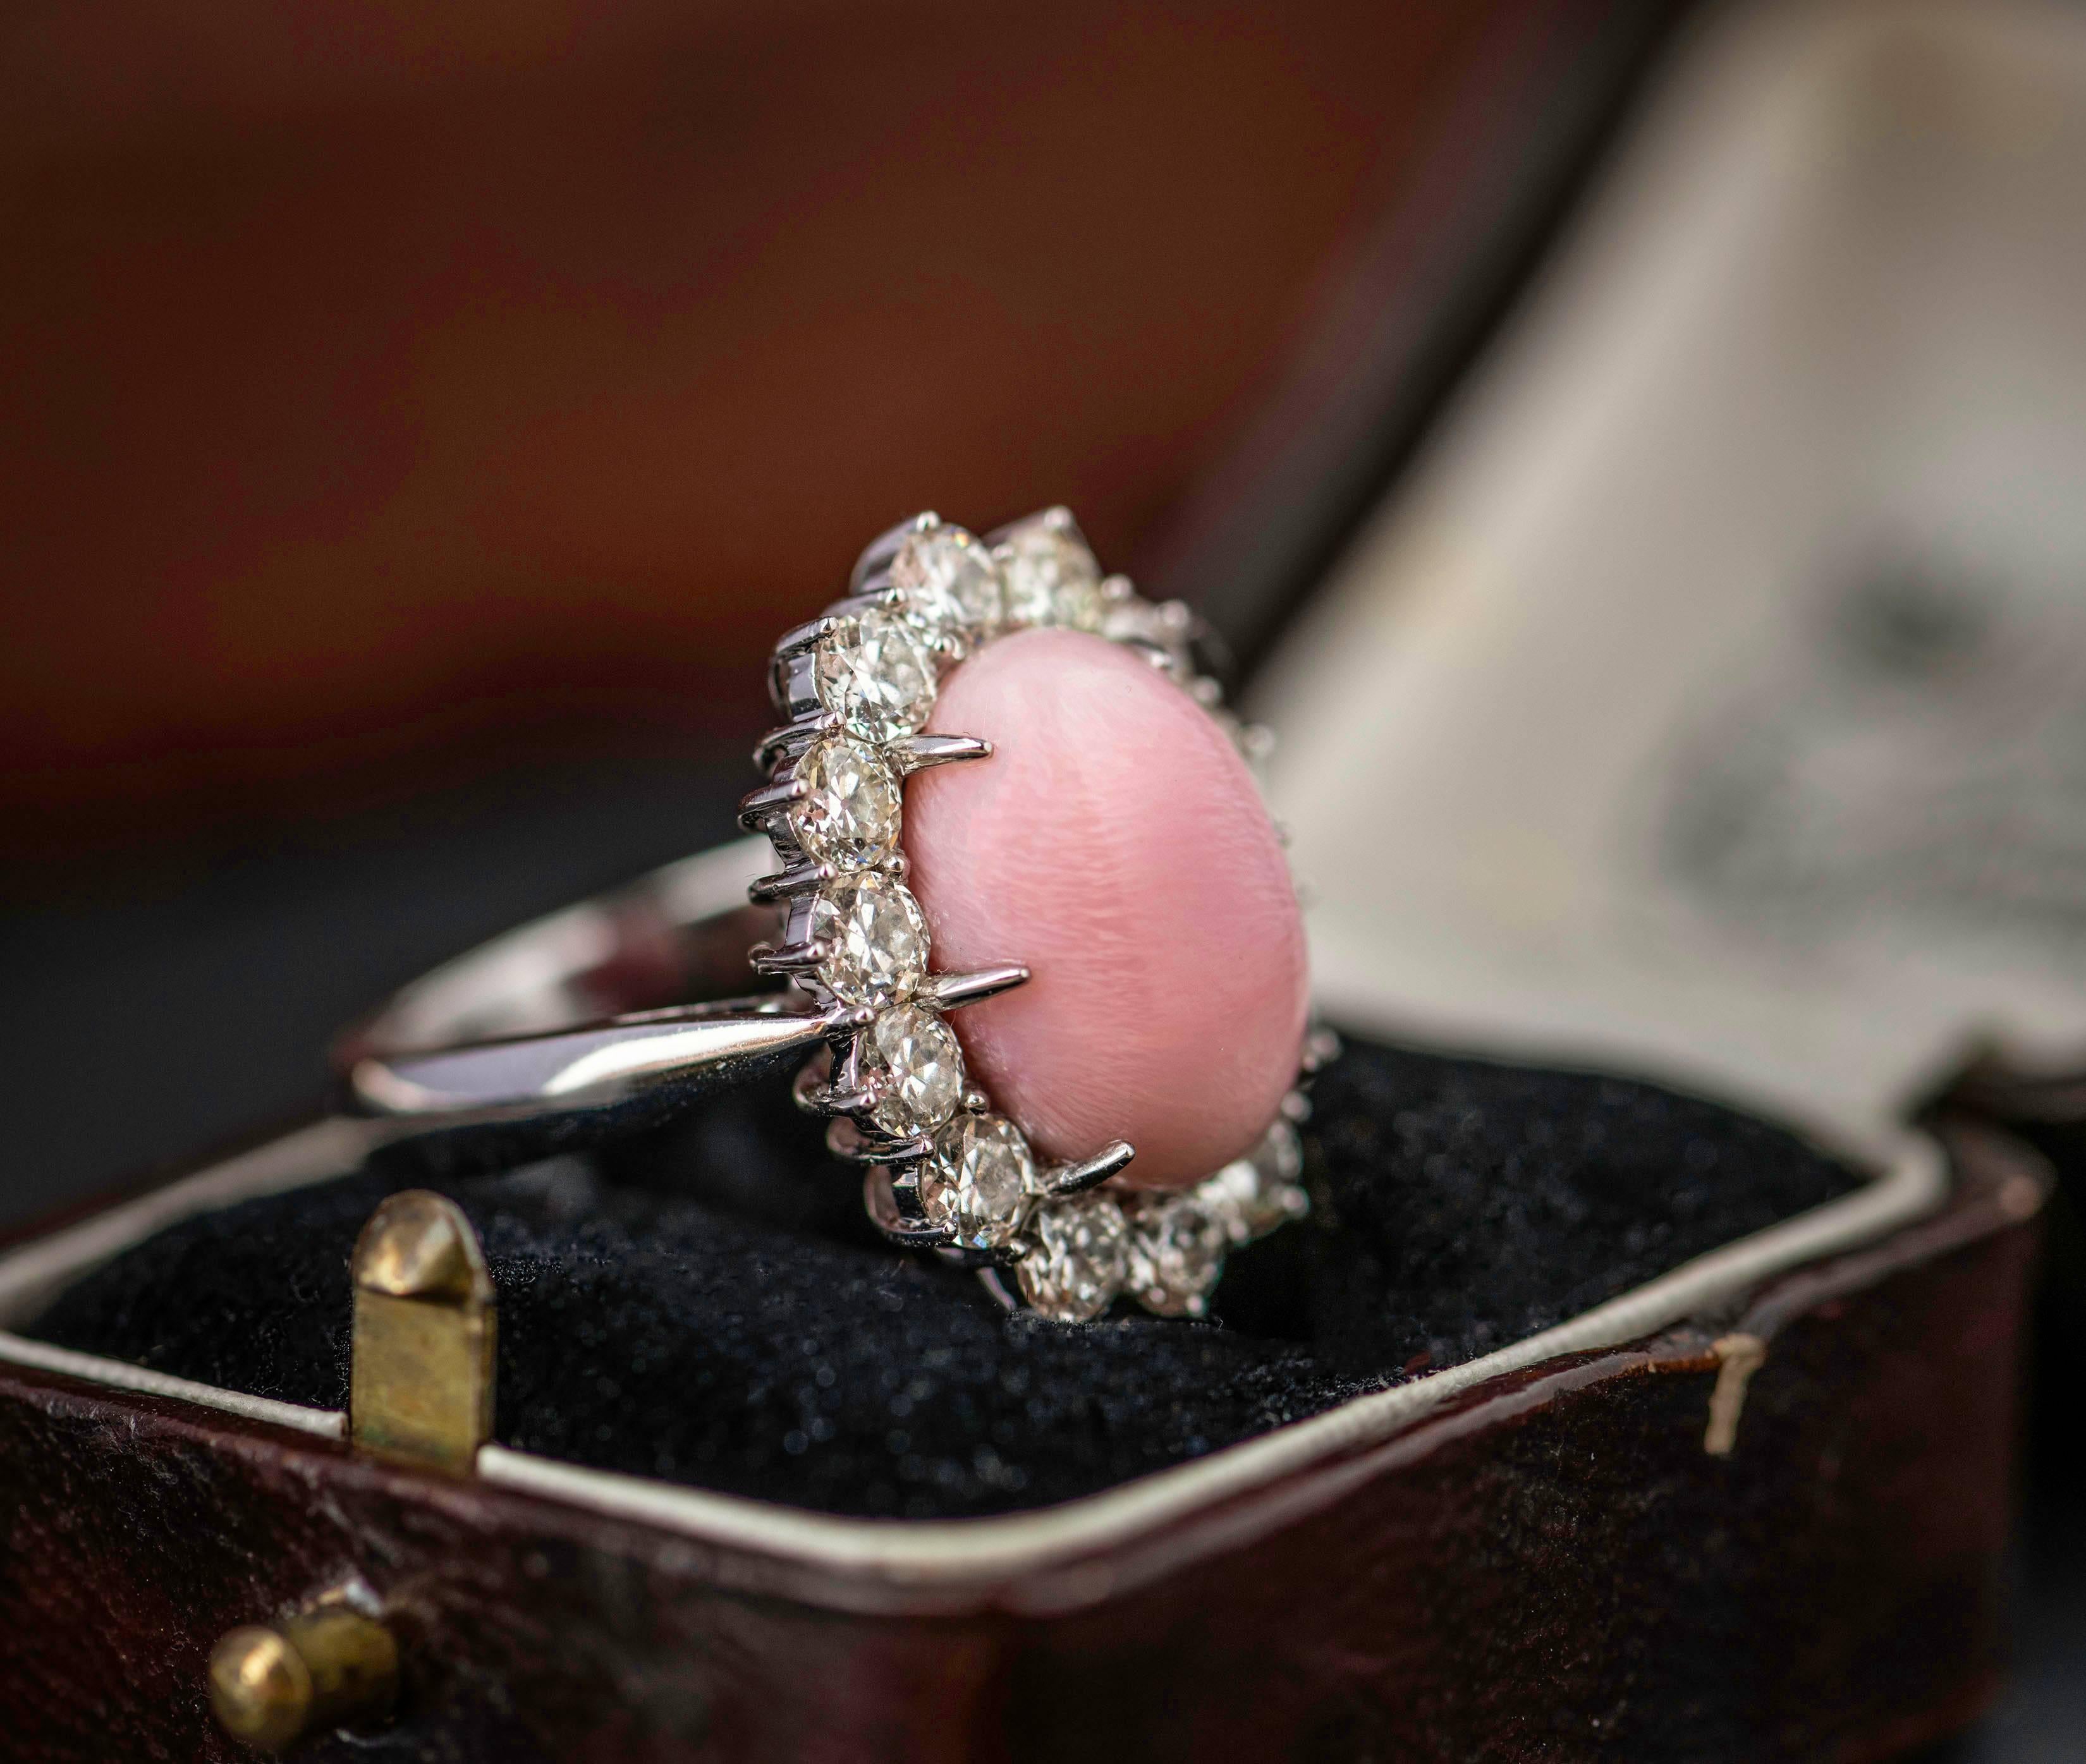 A classic design is considered classic for a very good reason. Cluster rings have been used for hundreds of years to highlight a special central stone. Here the central stone is a beautiful pink conch pearl. Conch pearls are all different as the